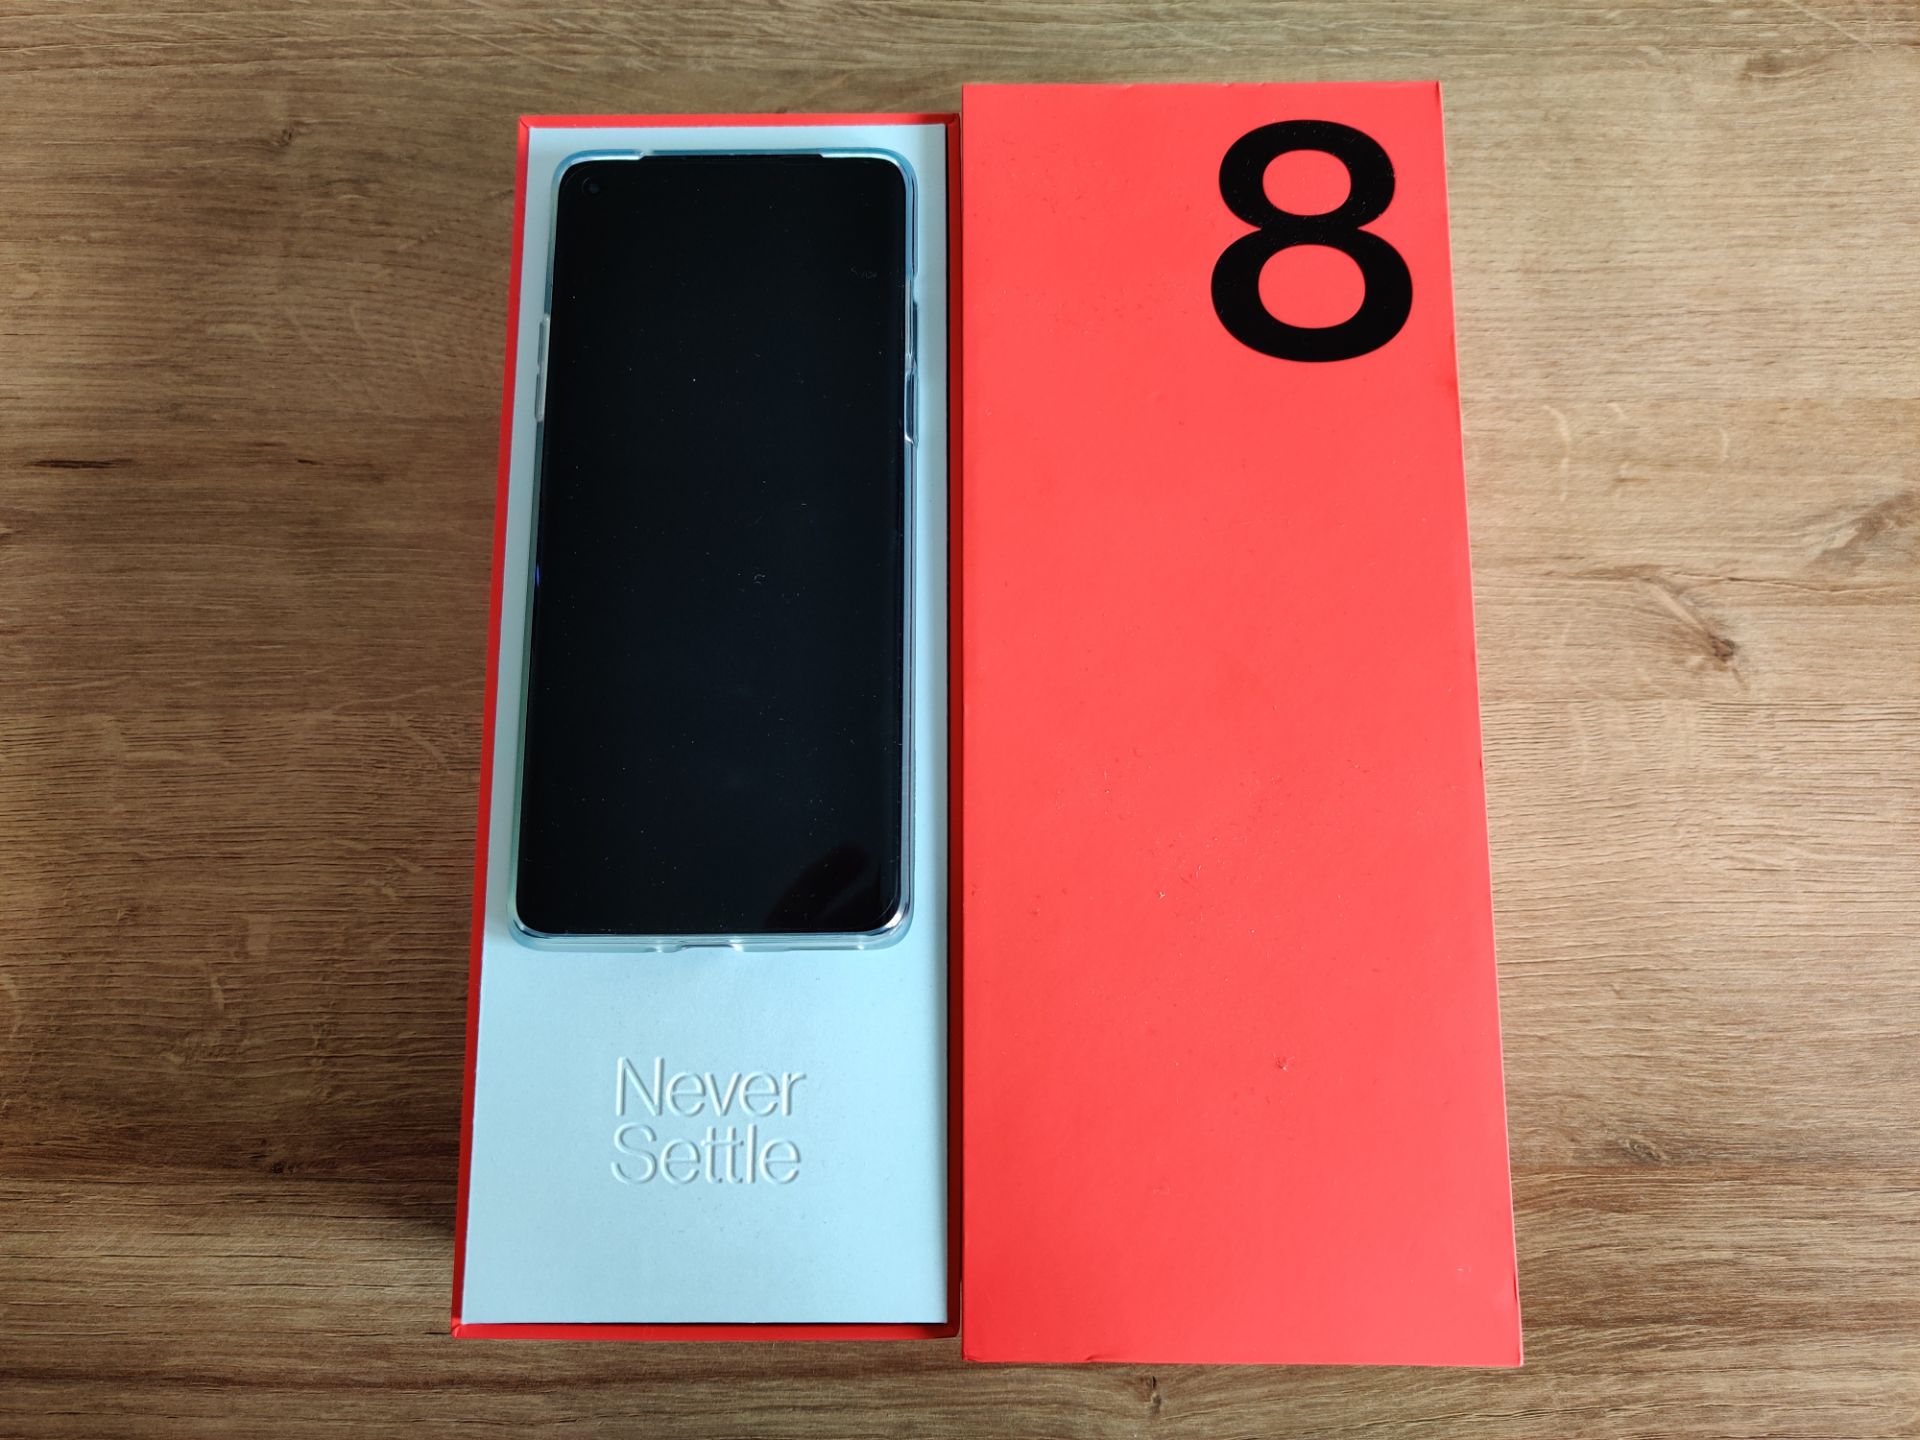 LIKE NEW! IMMACULATE CONDITION! ONEPLUS 8 128GB BLACK, UNLOCKED SMARTPHONE - LESS THAN A MONTH OLD!